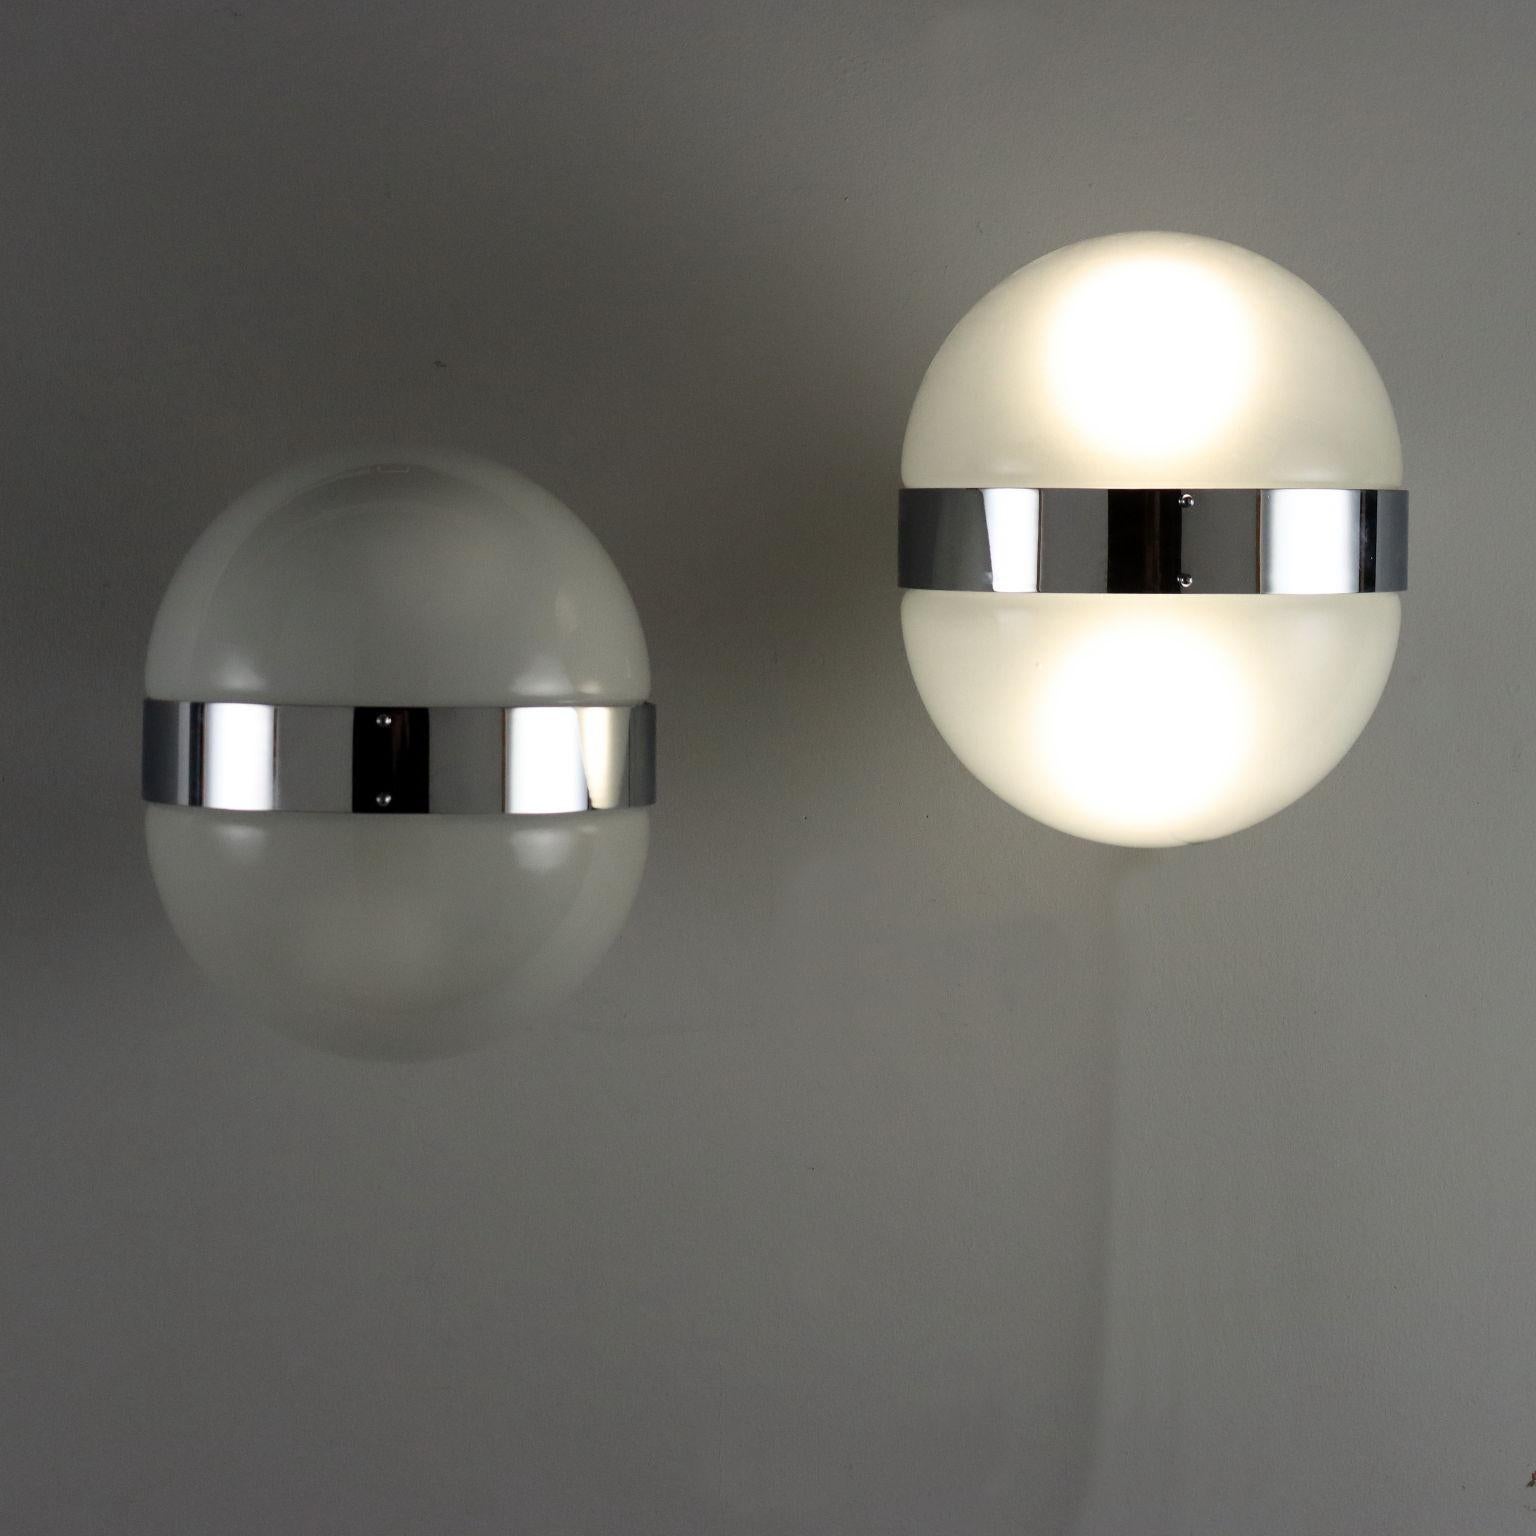 Italian Pair of 'Clio' Lamps by Sergio Mazza for Artemide 1970s